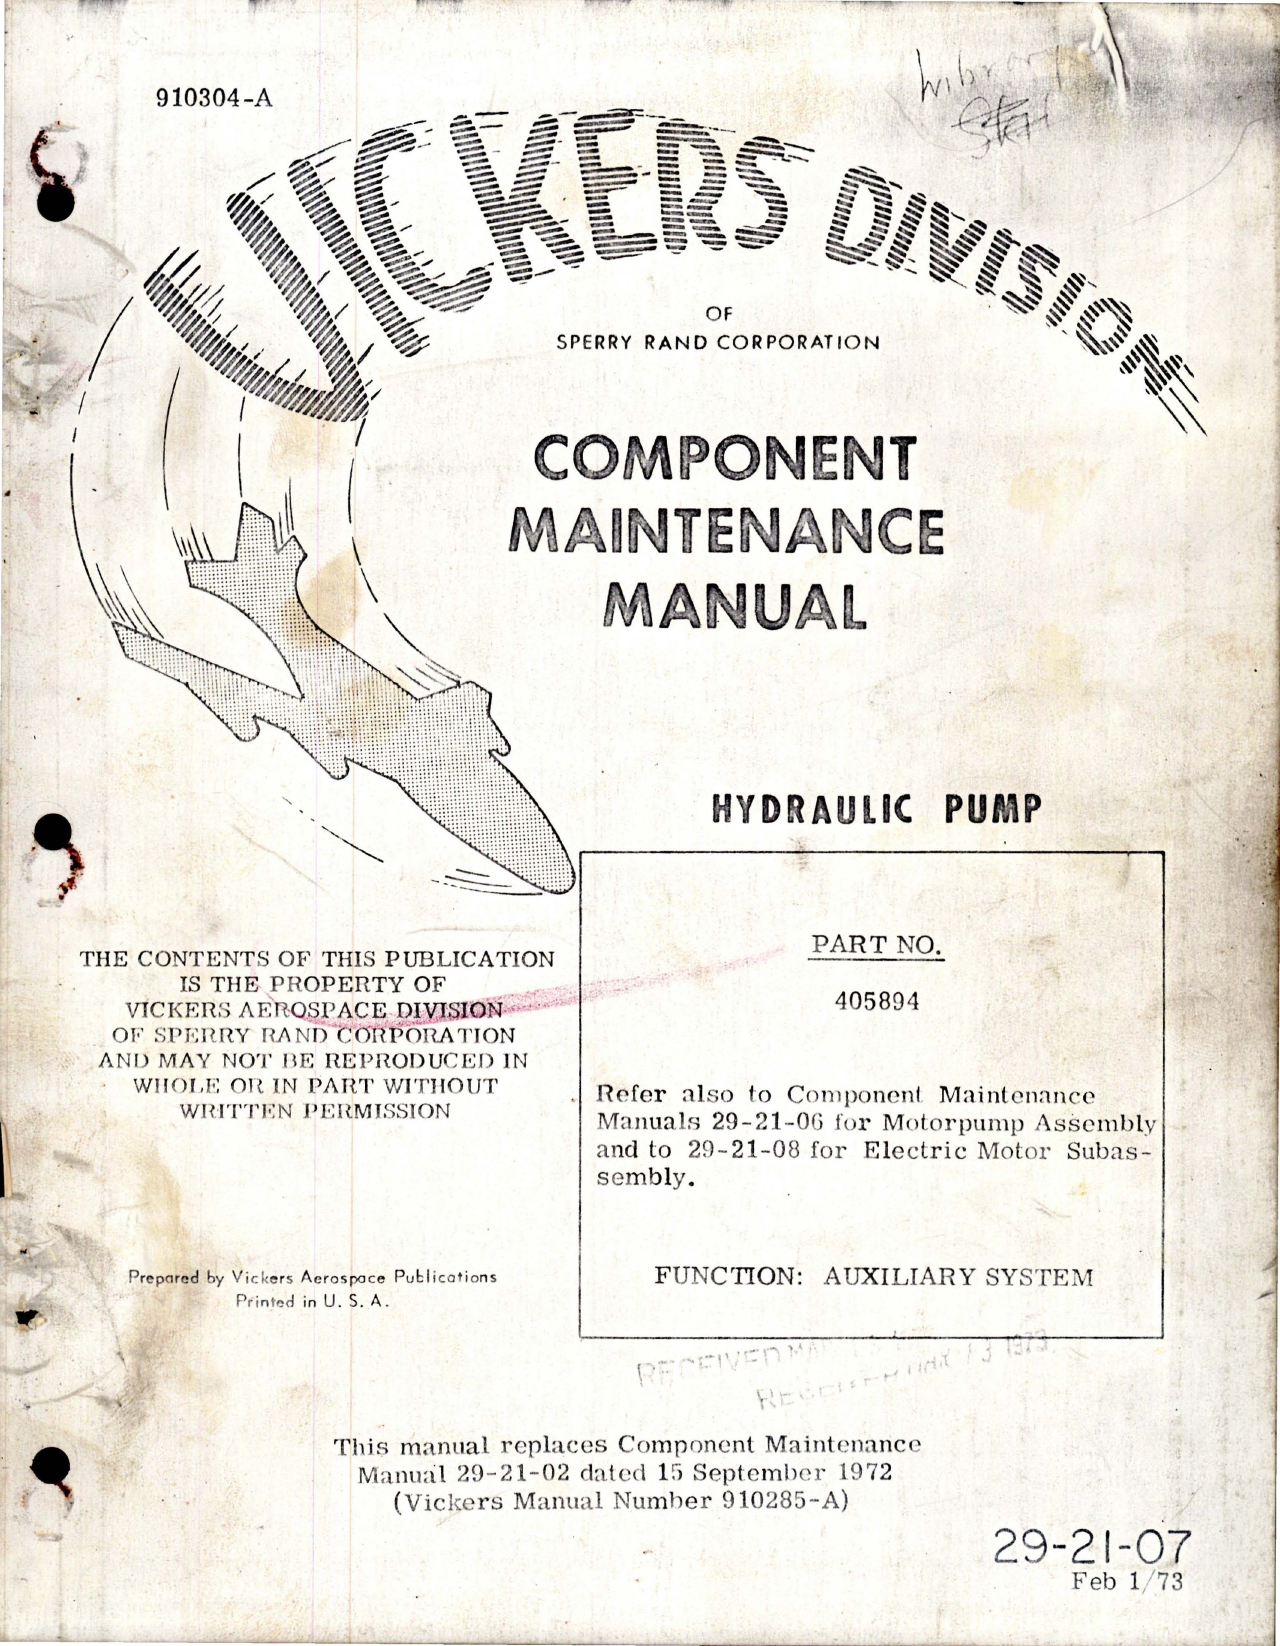 Sample page 1 from AirCorps Library document: Component Maintenance Manual for Hydraulic Pump - Part 405894 